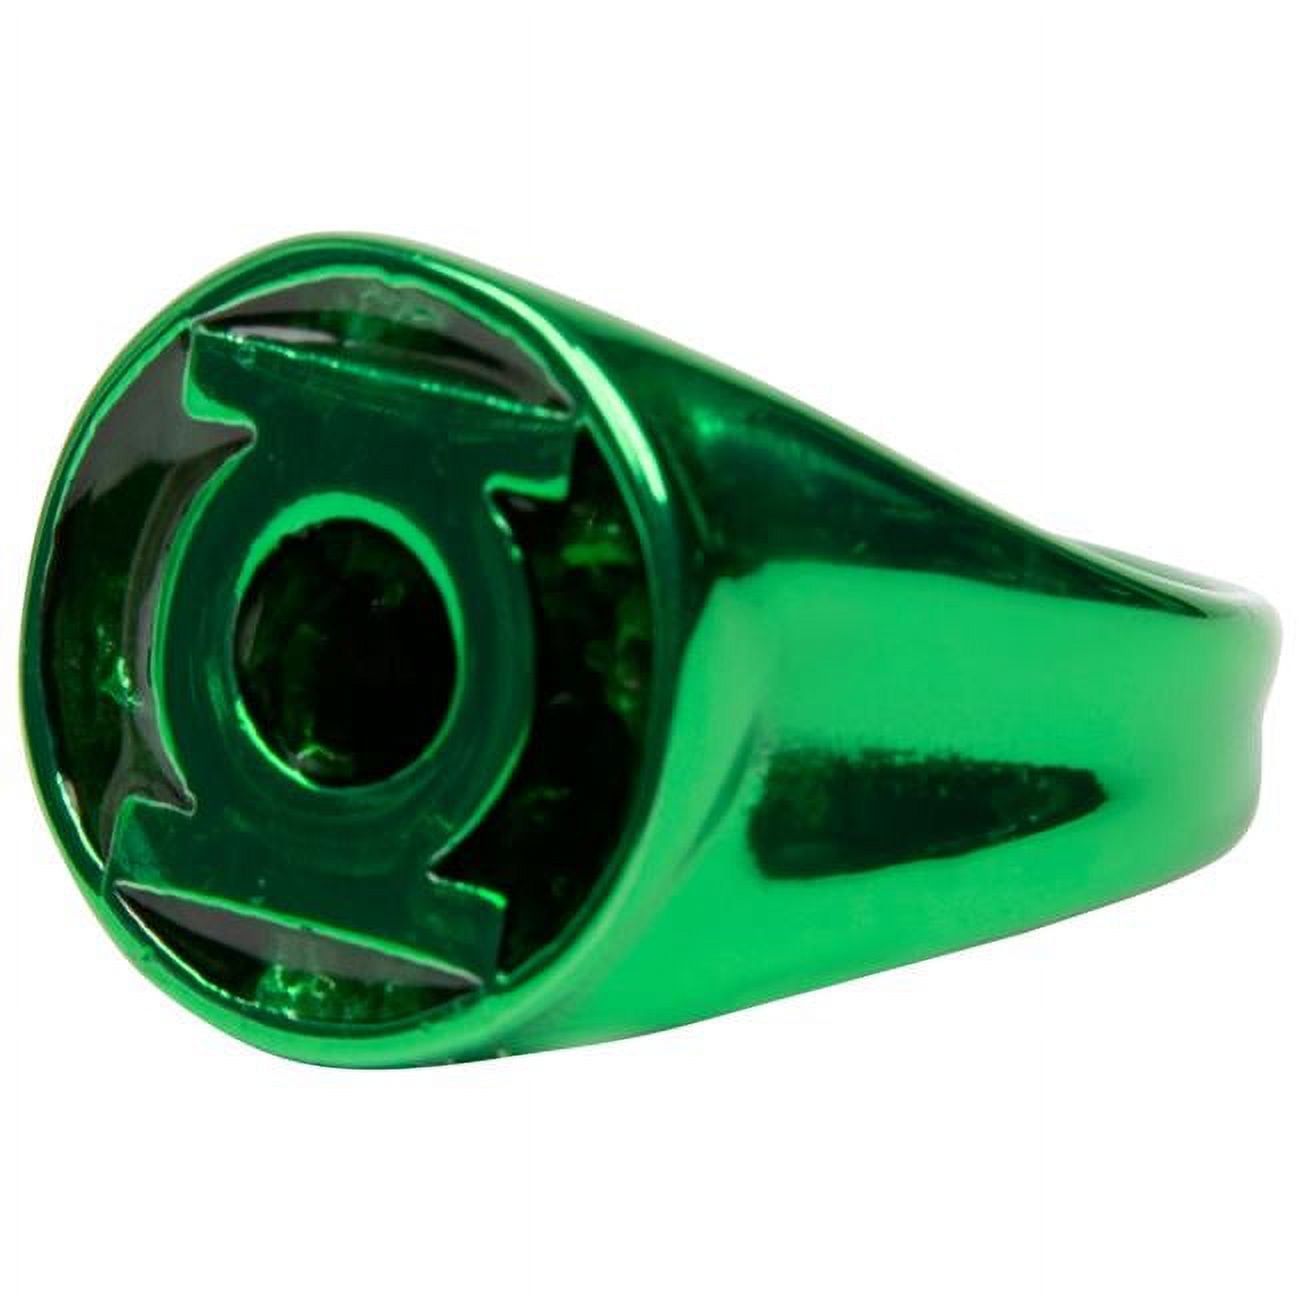 This Green Lantern Ring Projects A Signal To Alert The Corps